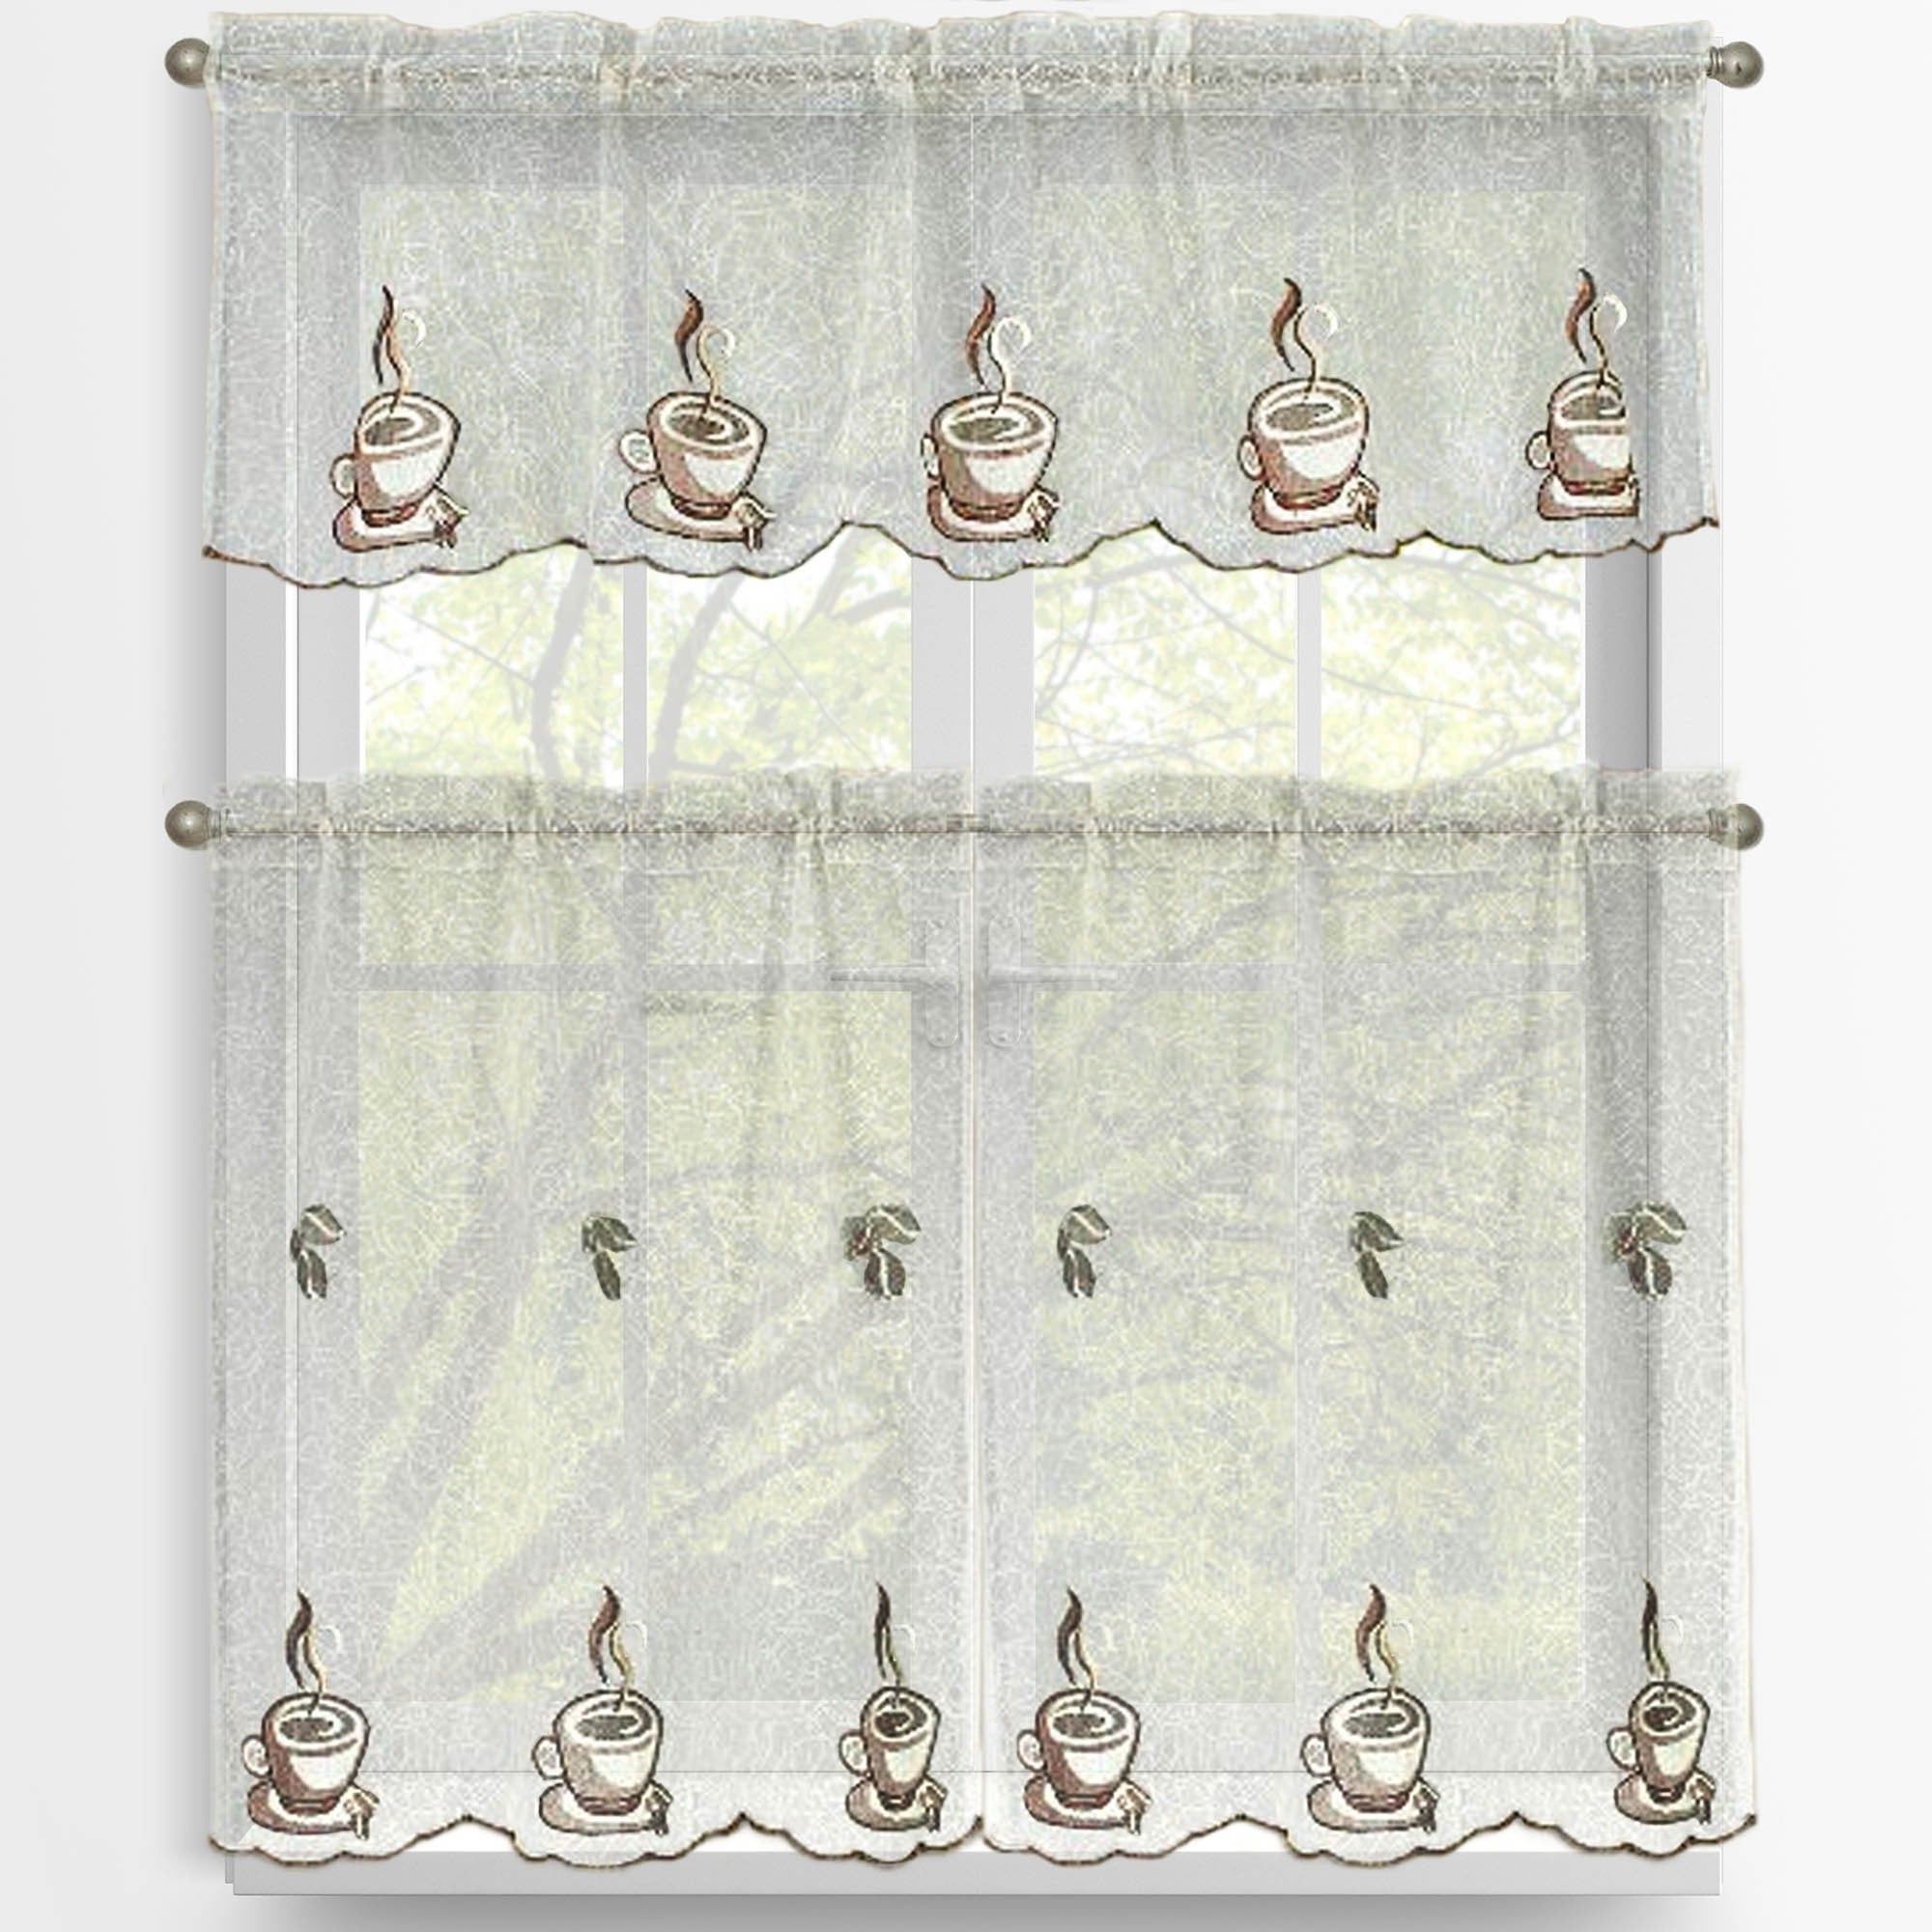 Window Elements Embroidered 3 Piece Kitchen Tier And Valance Set With Regard To Most Recent Coffee Drinks Embroidered Window Valances And Tiers (View 7 of 20)